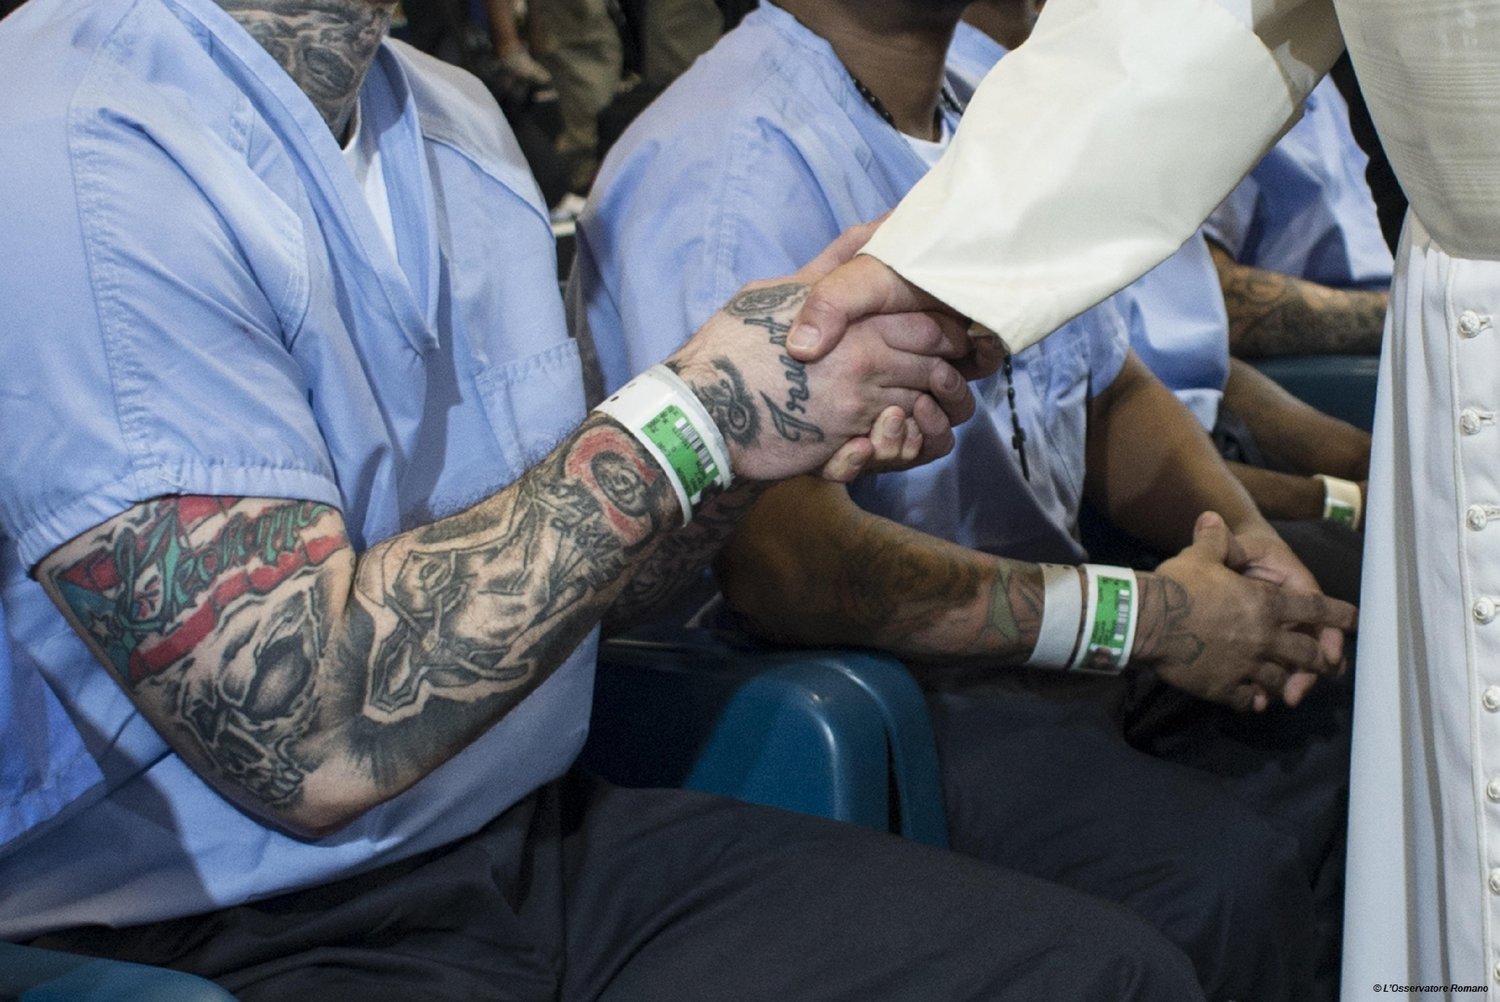 Pope Francis shakes hands with an inmate bearing a tattoo at the Curran-Fromhold Correctional Facility in Philadelphia Sept. 27, 2015. “He always tries to visit places where people are suffering,” Andrea Tornielli, editorial director of the Vatican Dicastery for Communication, told CNS.